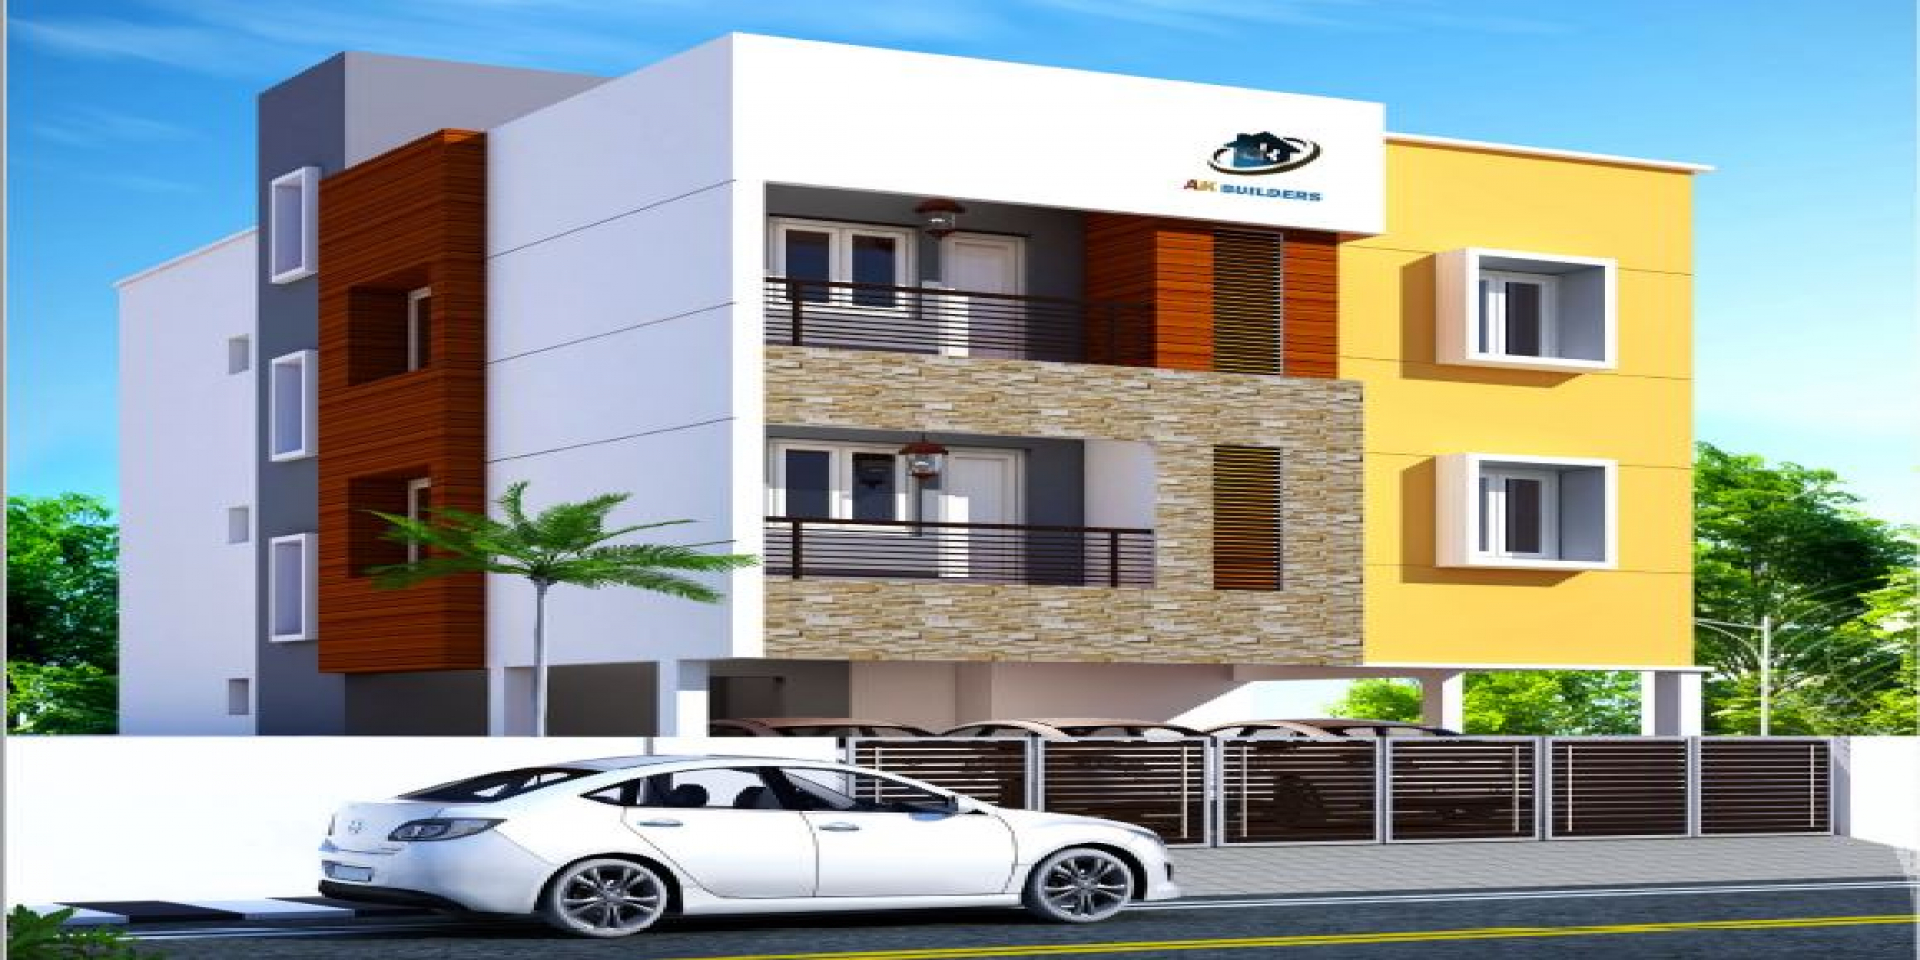 1, 2 BHK Apartment for sale in Chitlapakkam